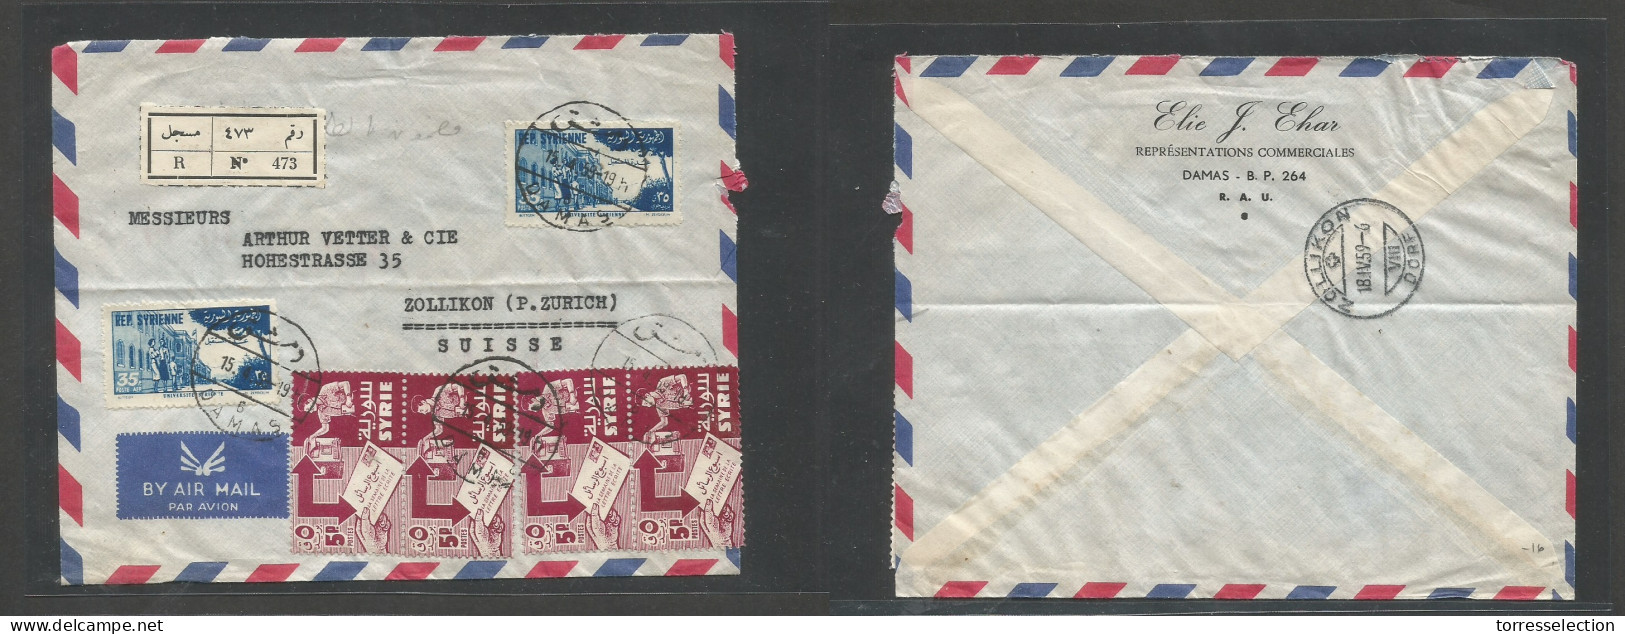 SYRIA. 1959 (15 Apr) Damas - Switzerland, Zellikon (18 April) Registered Air Mixed Issues Multifkd Envelope At 90p Rate, - Syrien